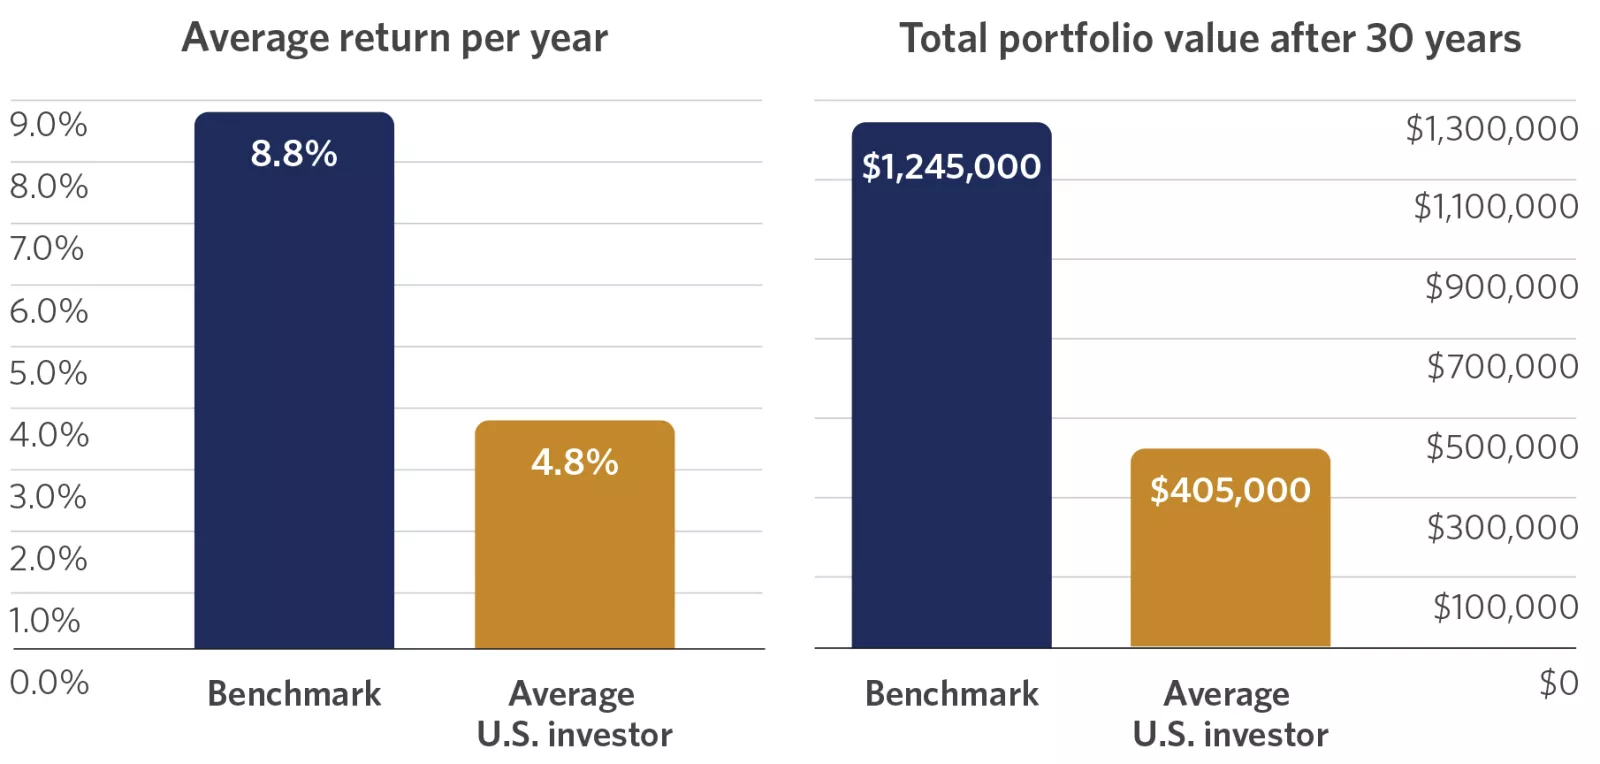  Bar chart showing how investing behavior can lead to poor performance
